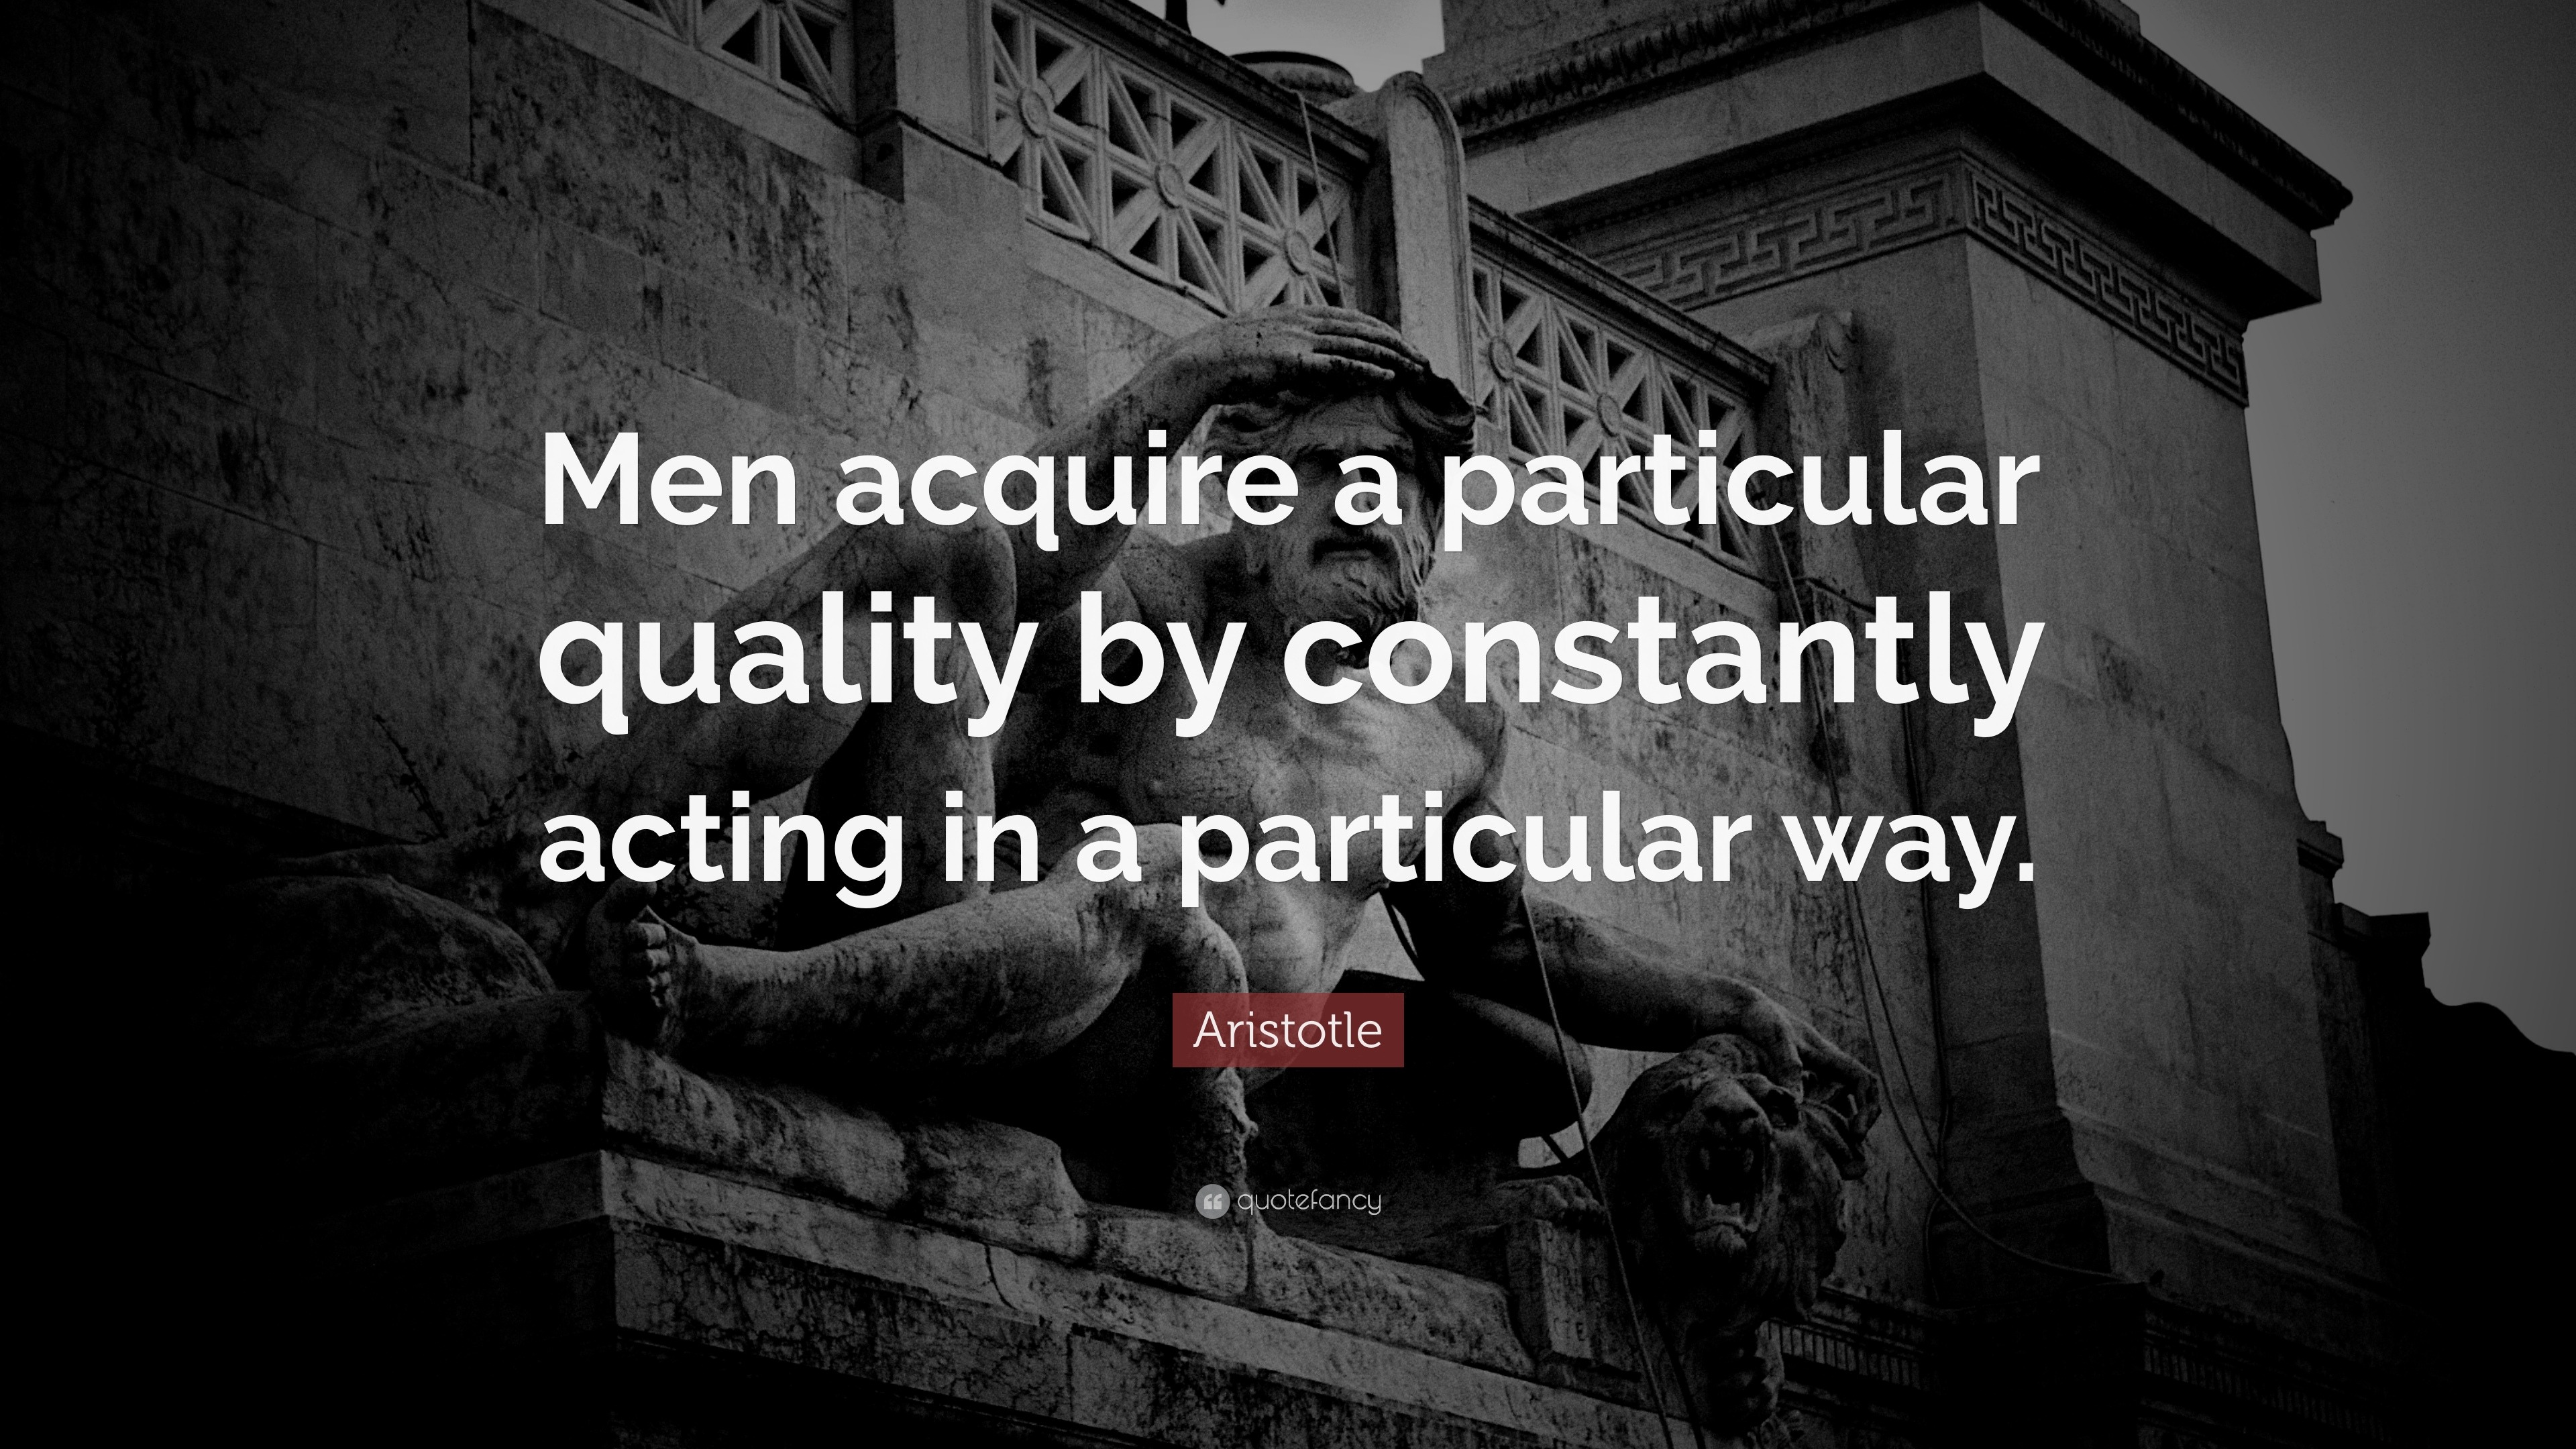 Destiny Quotes “Men acquire a particular quality by constantly acting in a particular way